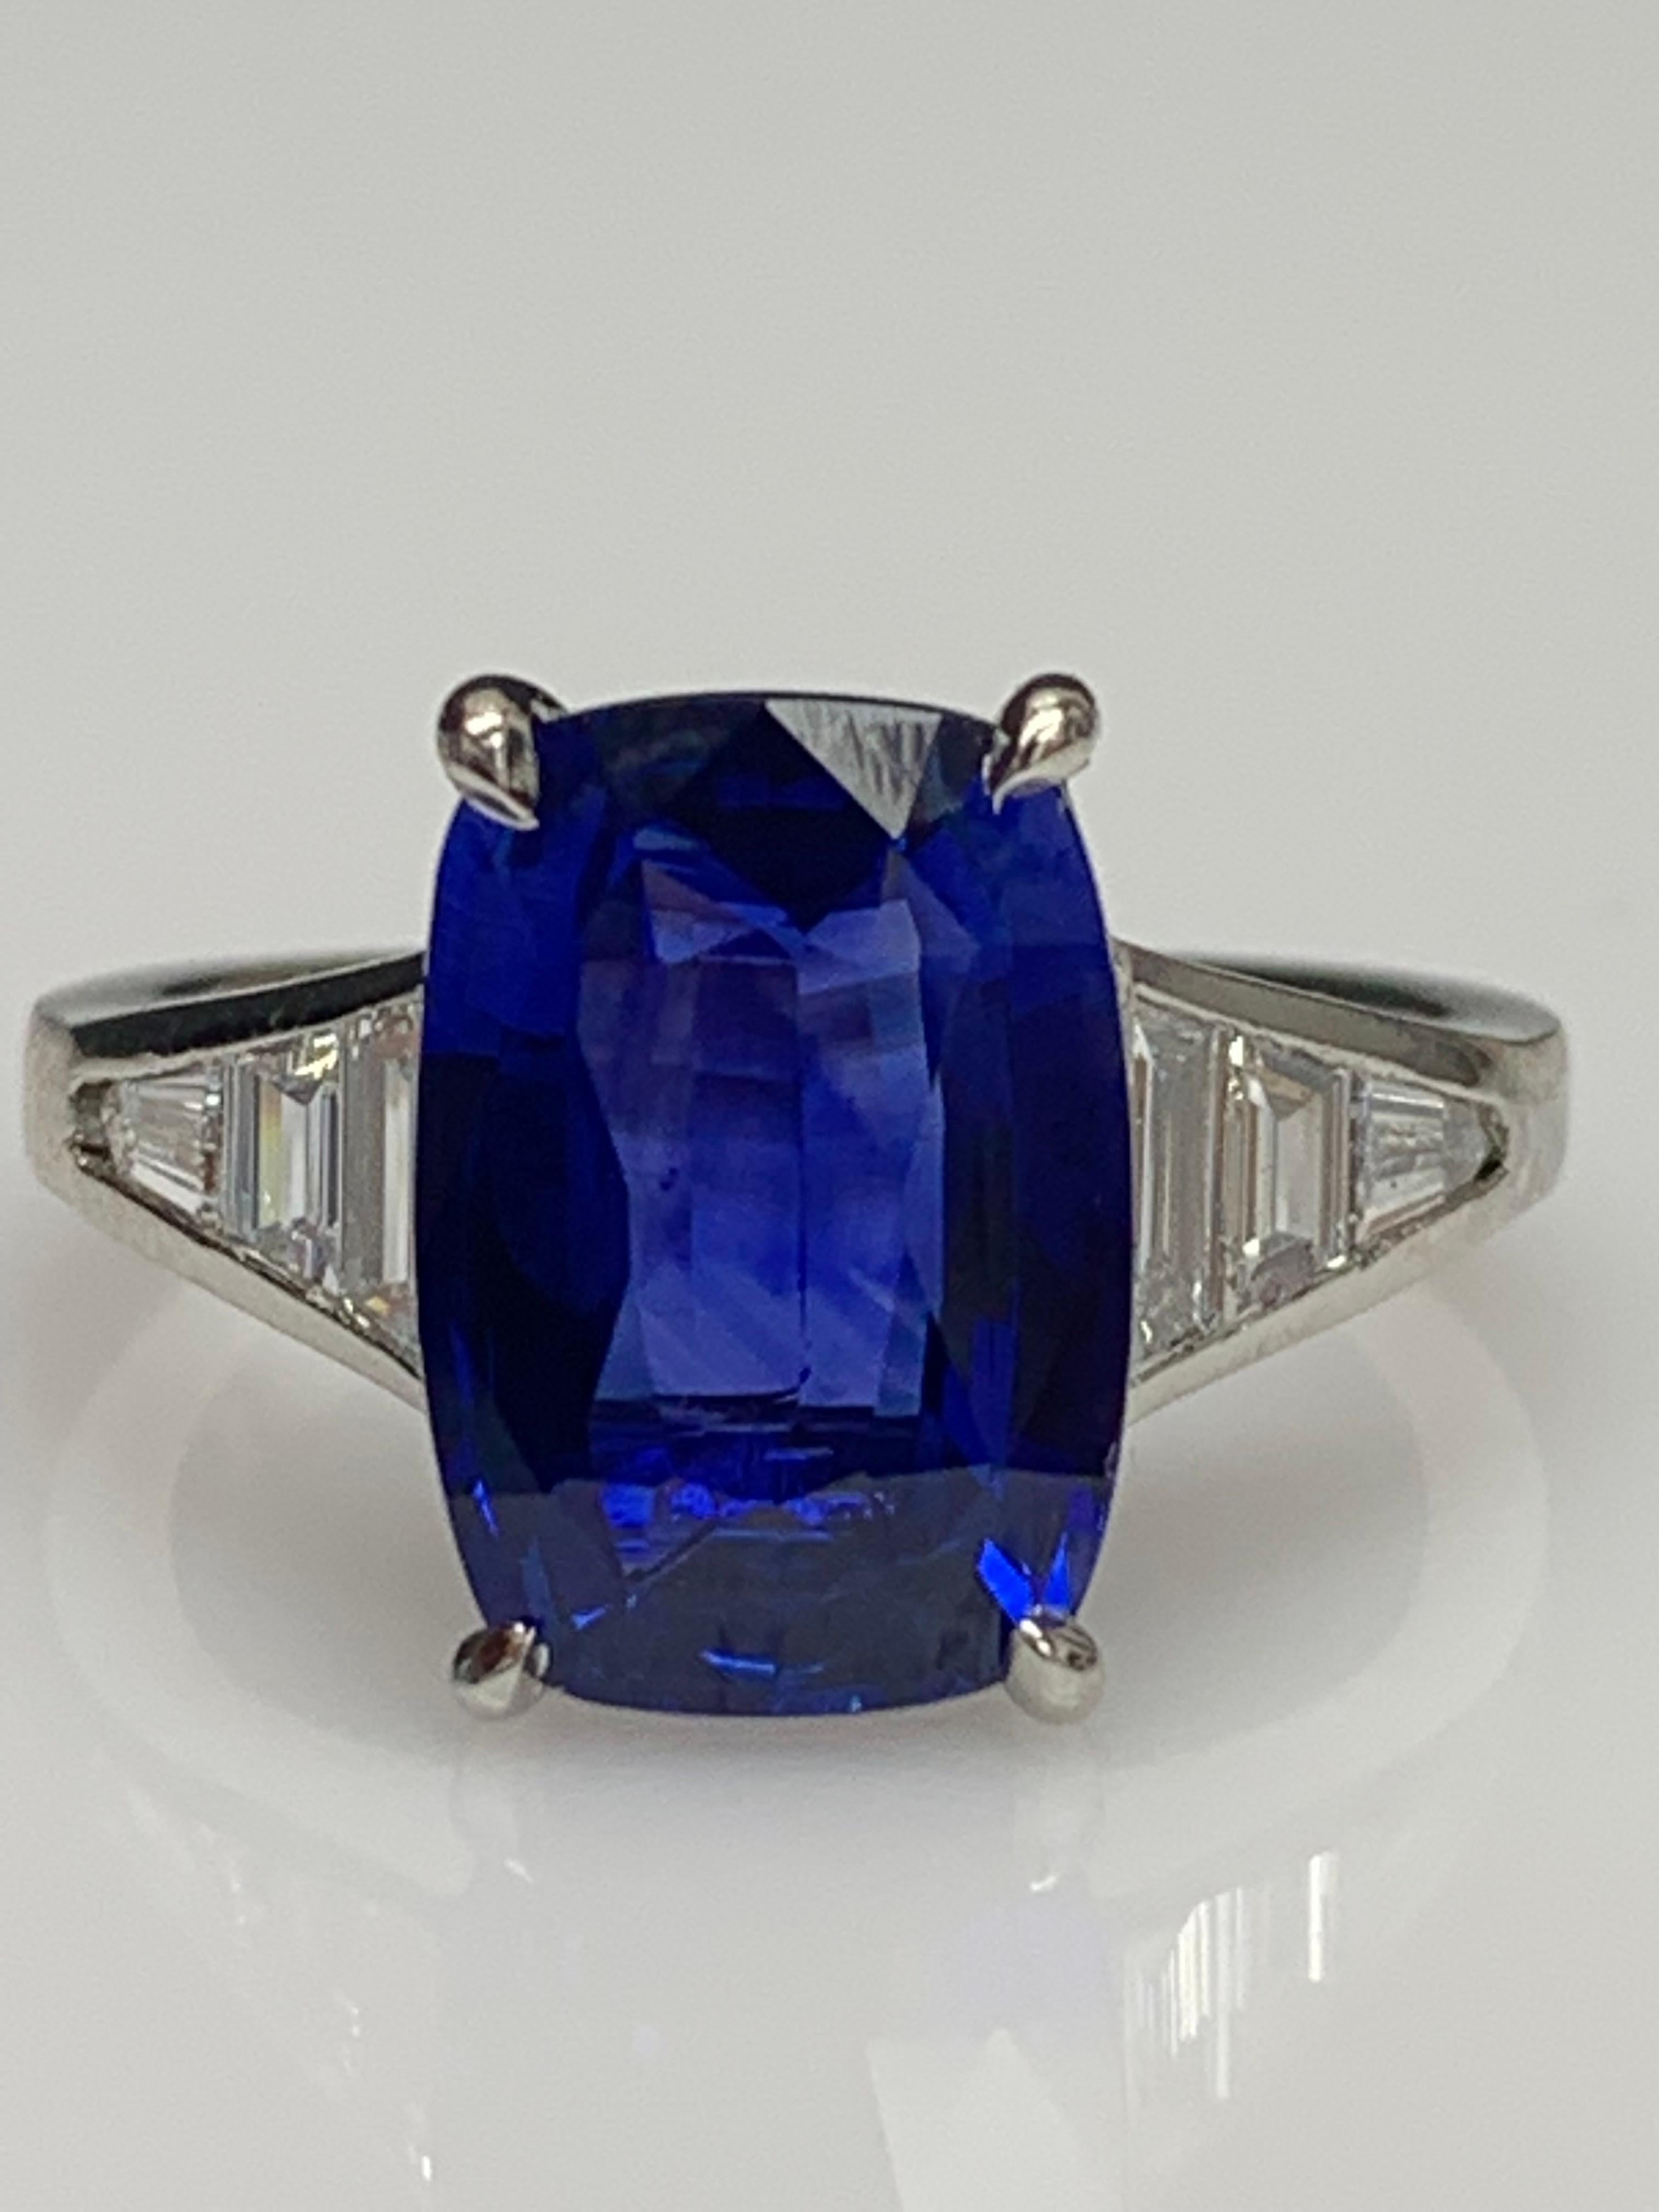 A stunning well-crafted engagement ring showcasing a 4.50 Carat elongated Cushion Blue Sapphire. Flanking the center stone are Perfectly matched graduating step-cut diamonds, channel set in a polished platinum mounting. 6 Accent diamonds weighing